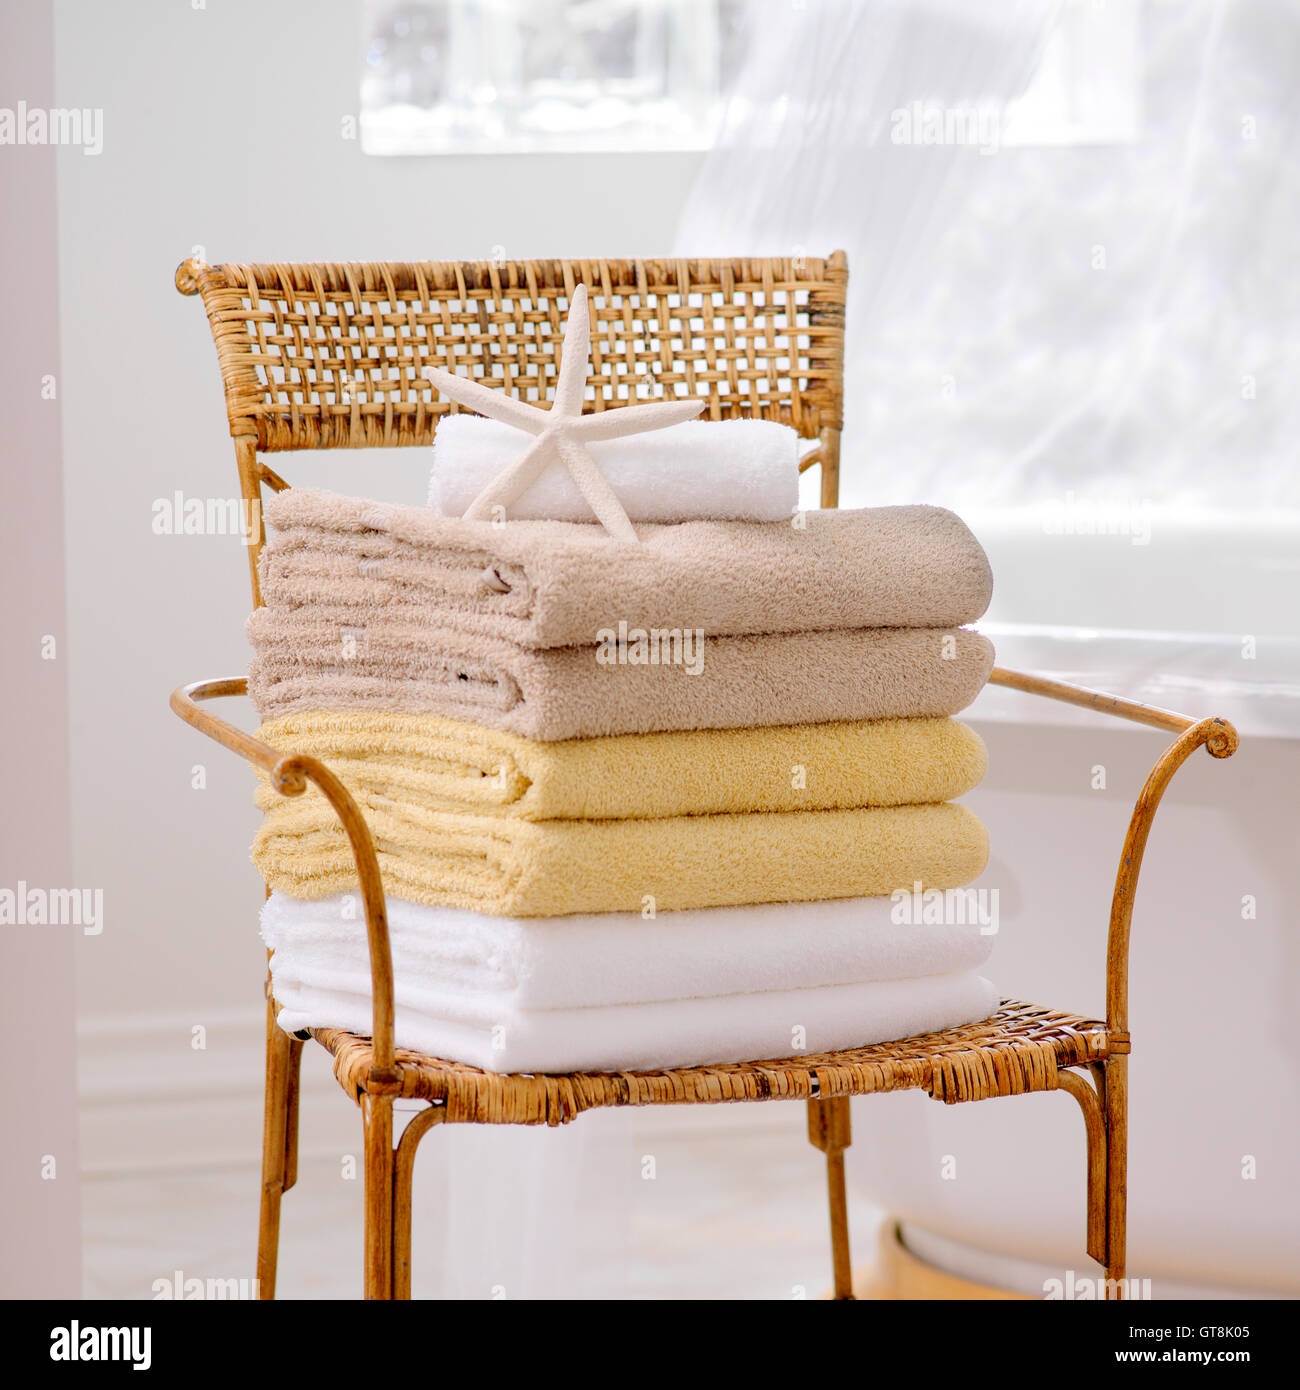 Stack of Fresh Towels and Starfish on Wicker Chair in Bathroom Stock Photo